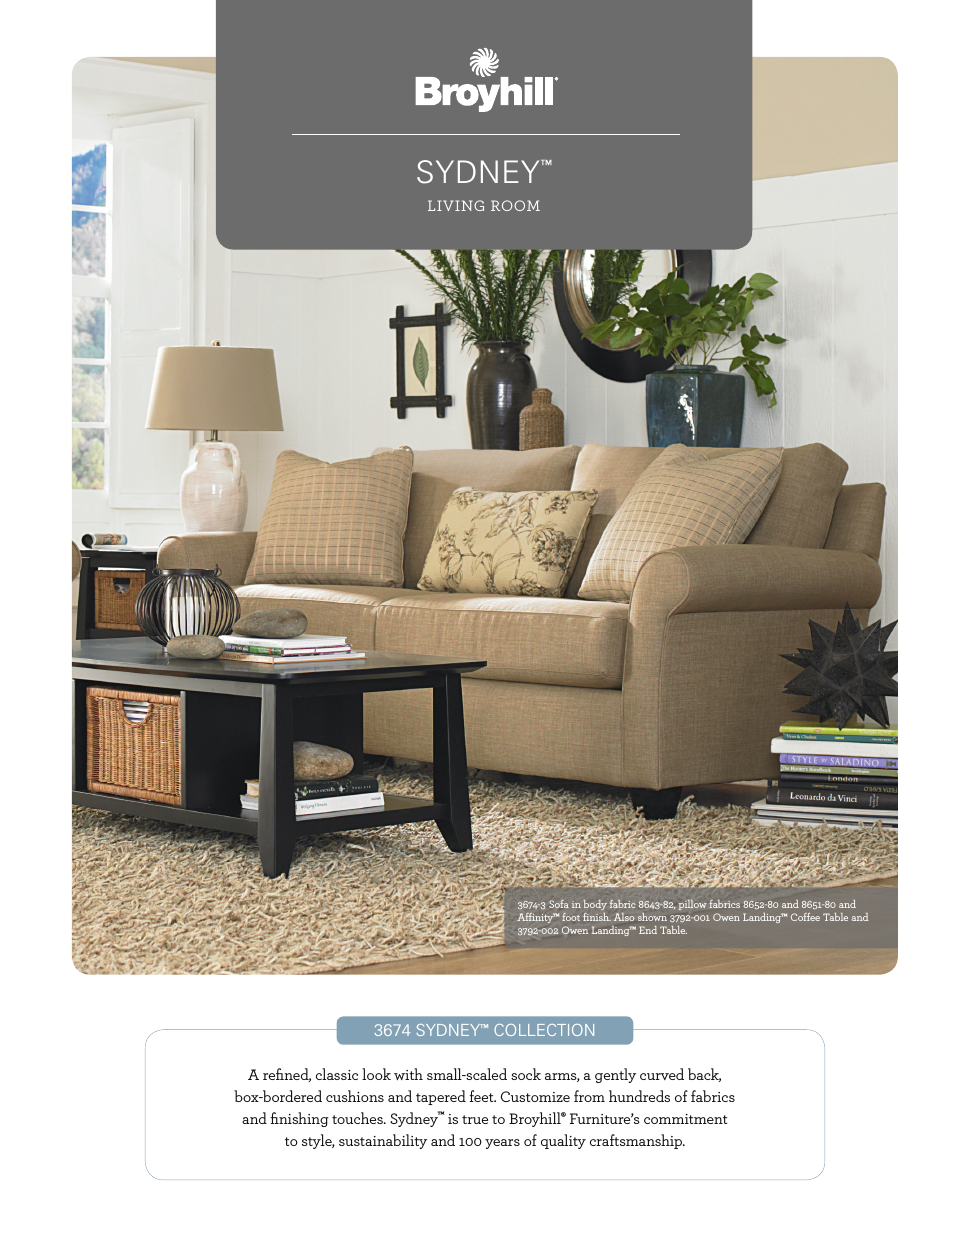 SYDNEY SOFA, CHAIRS, OTTOMAN Product Details